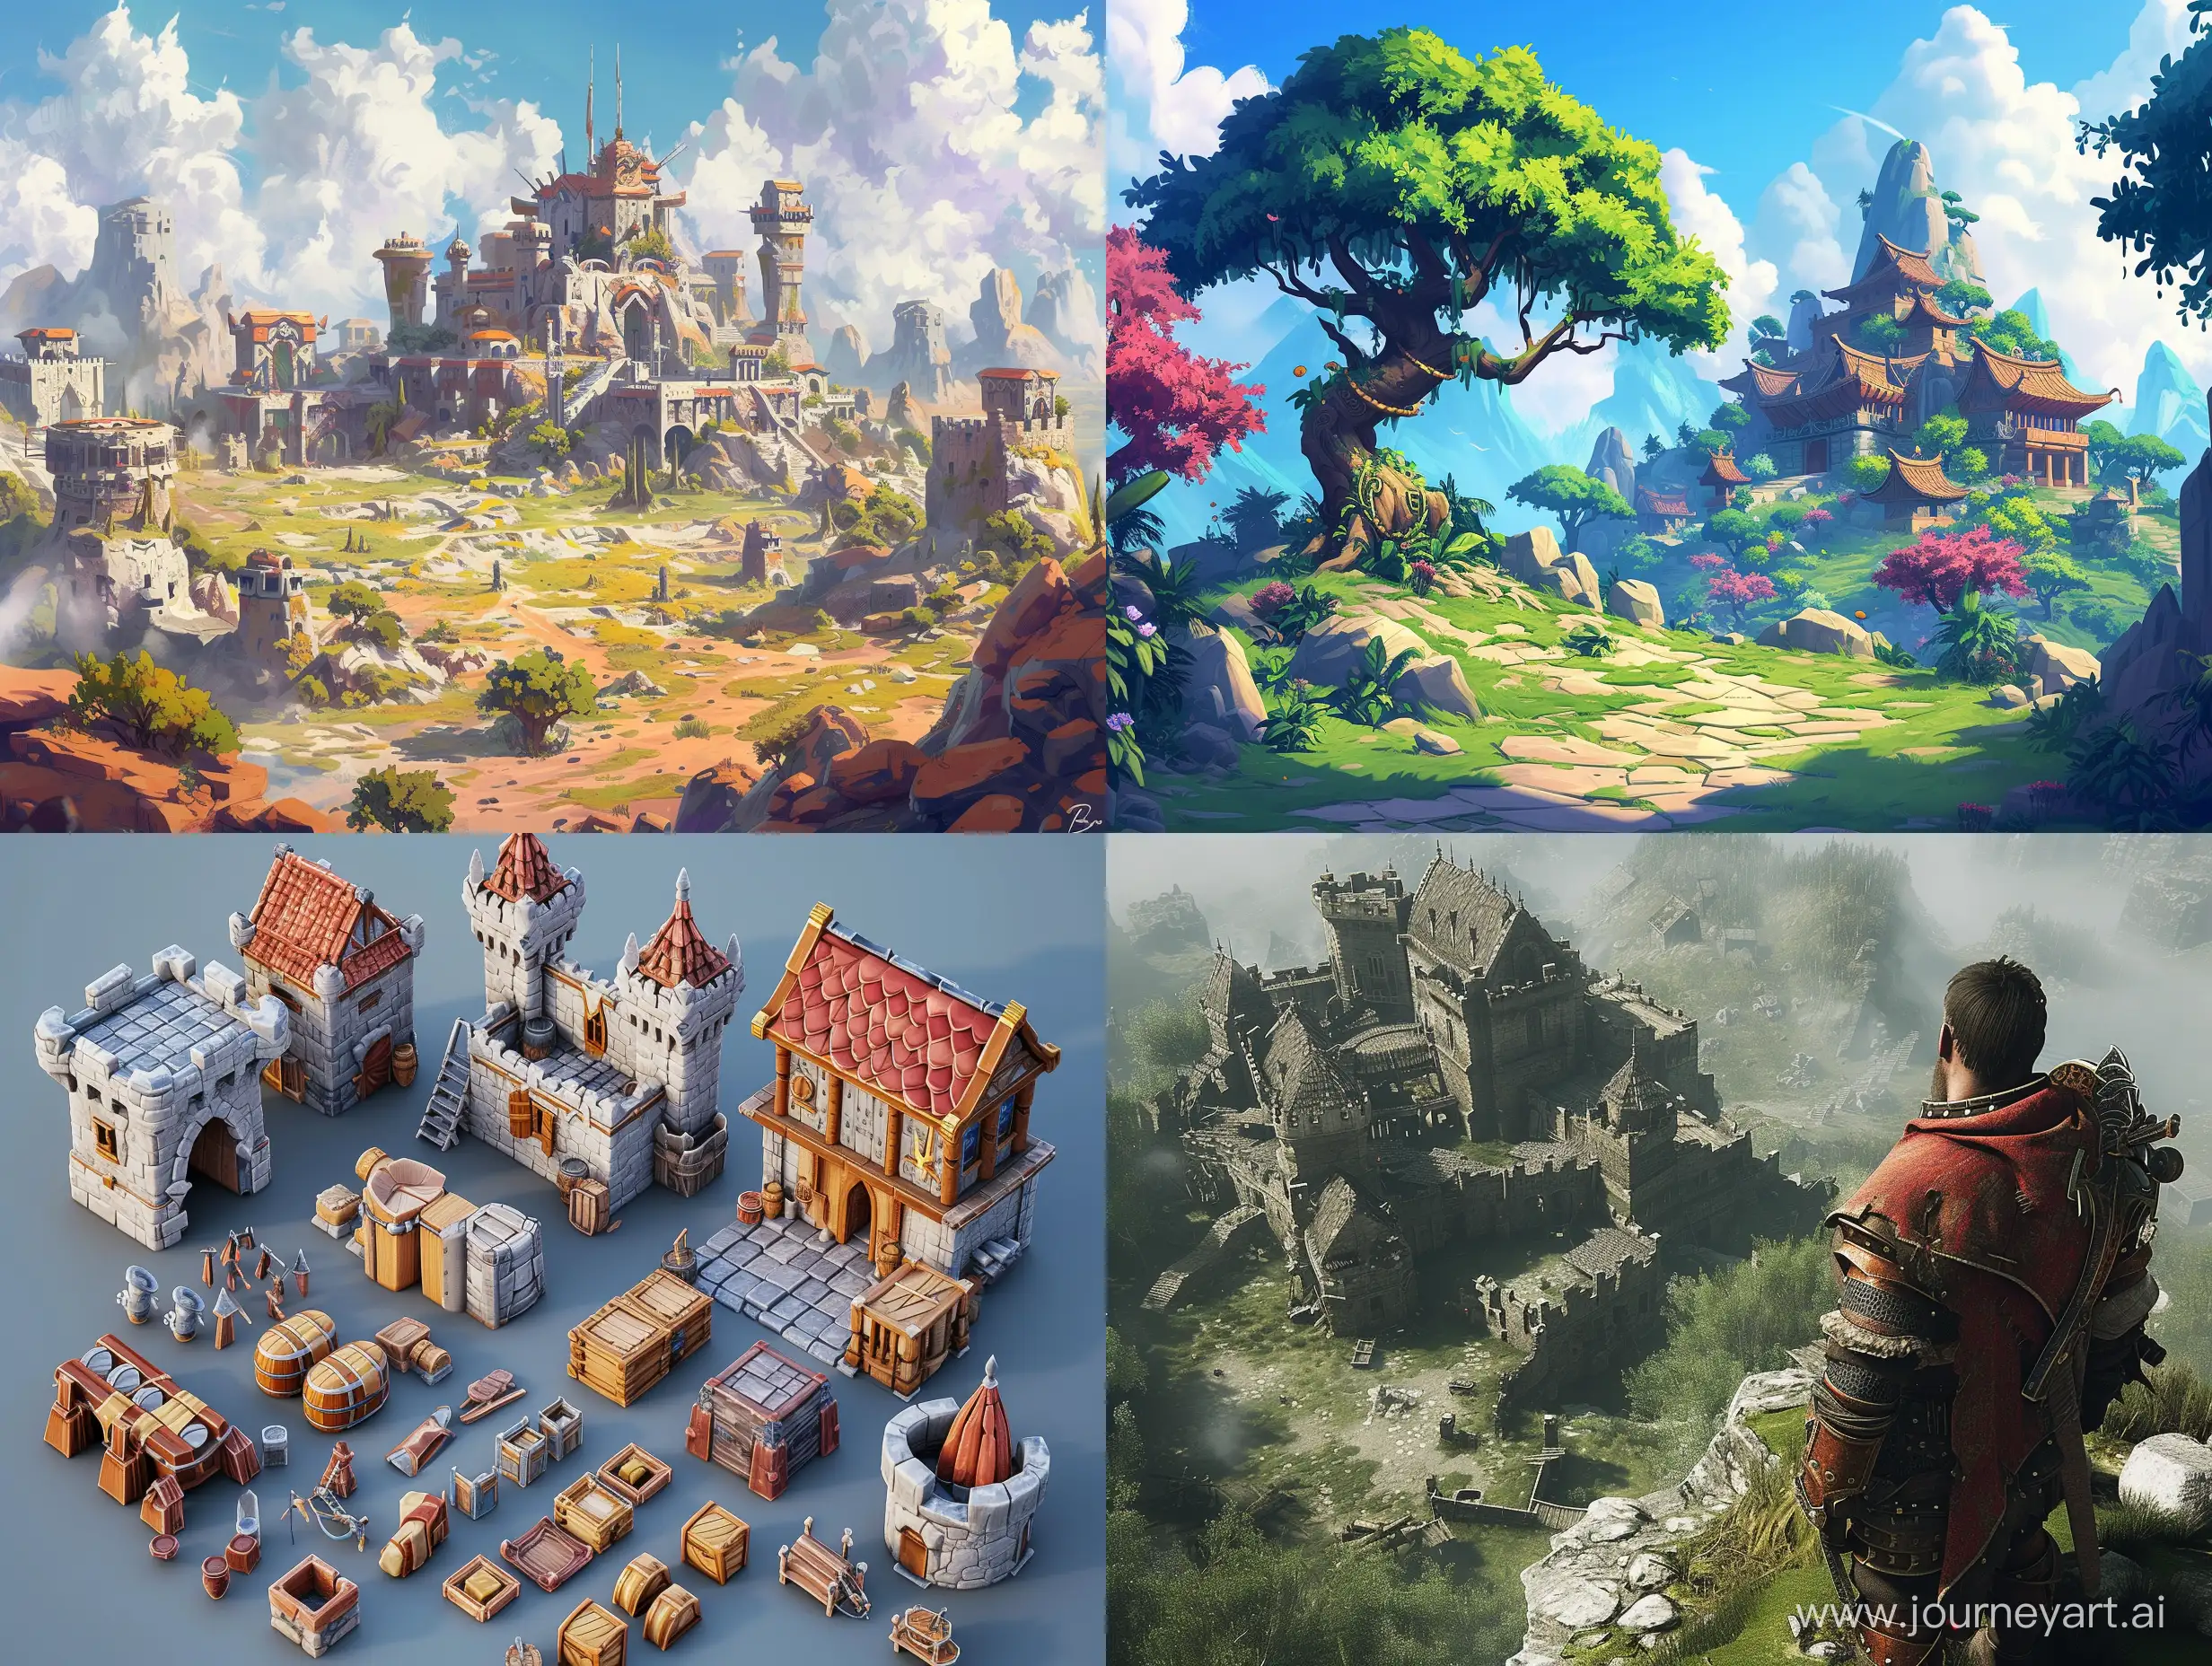 Epic-Fantasy-RPG-Game-Assets-Characters-and-Environments